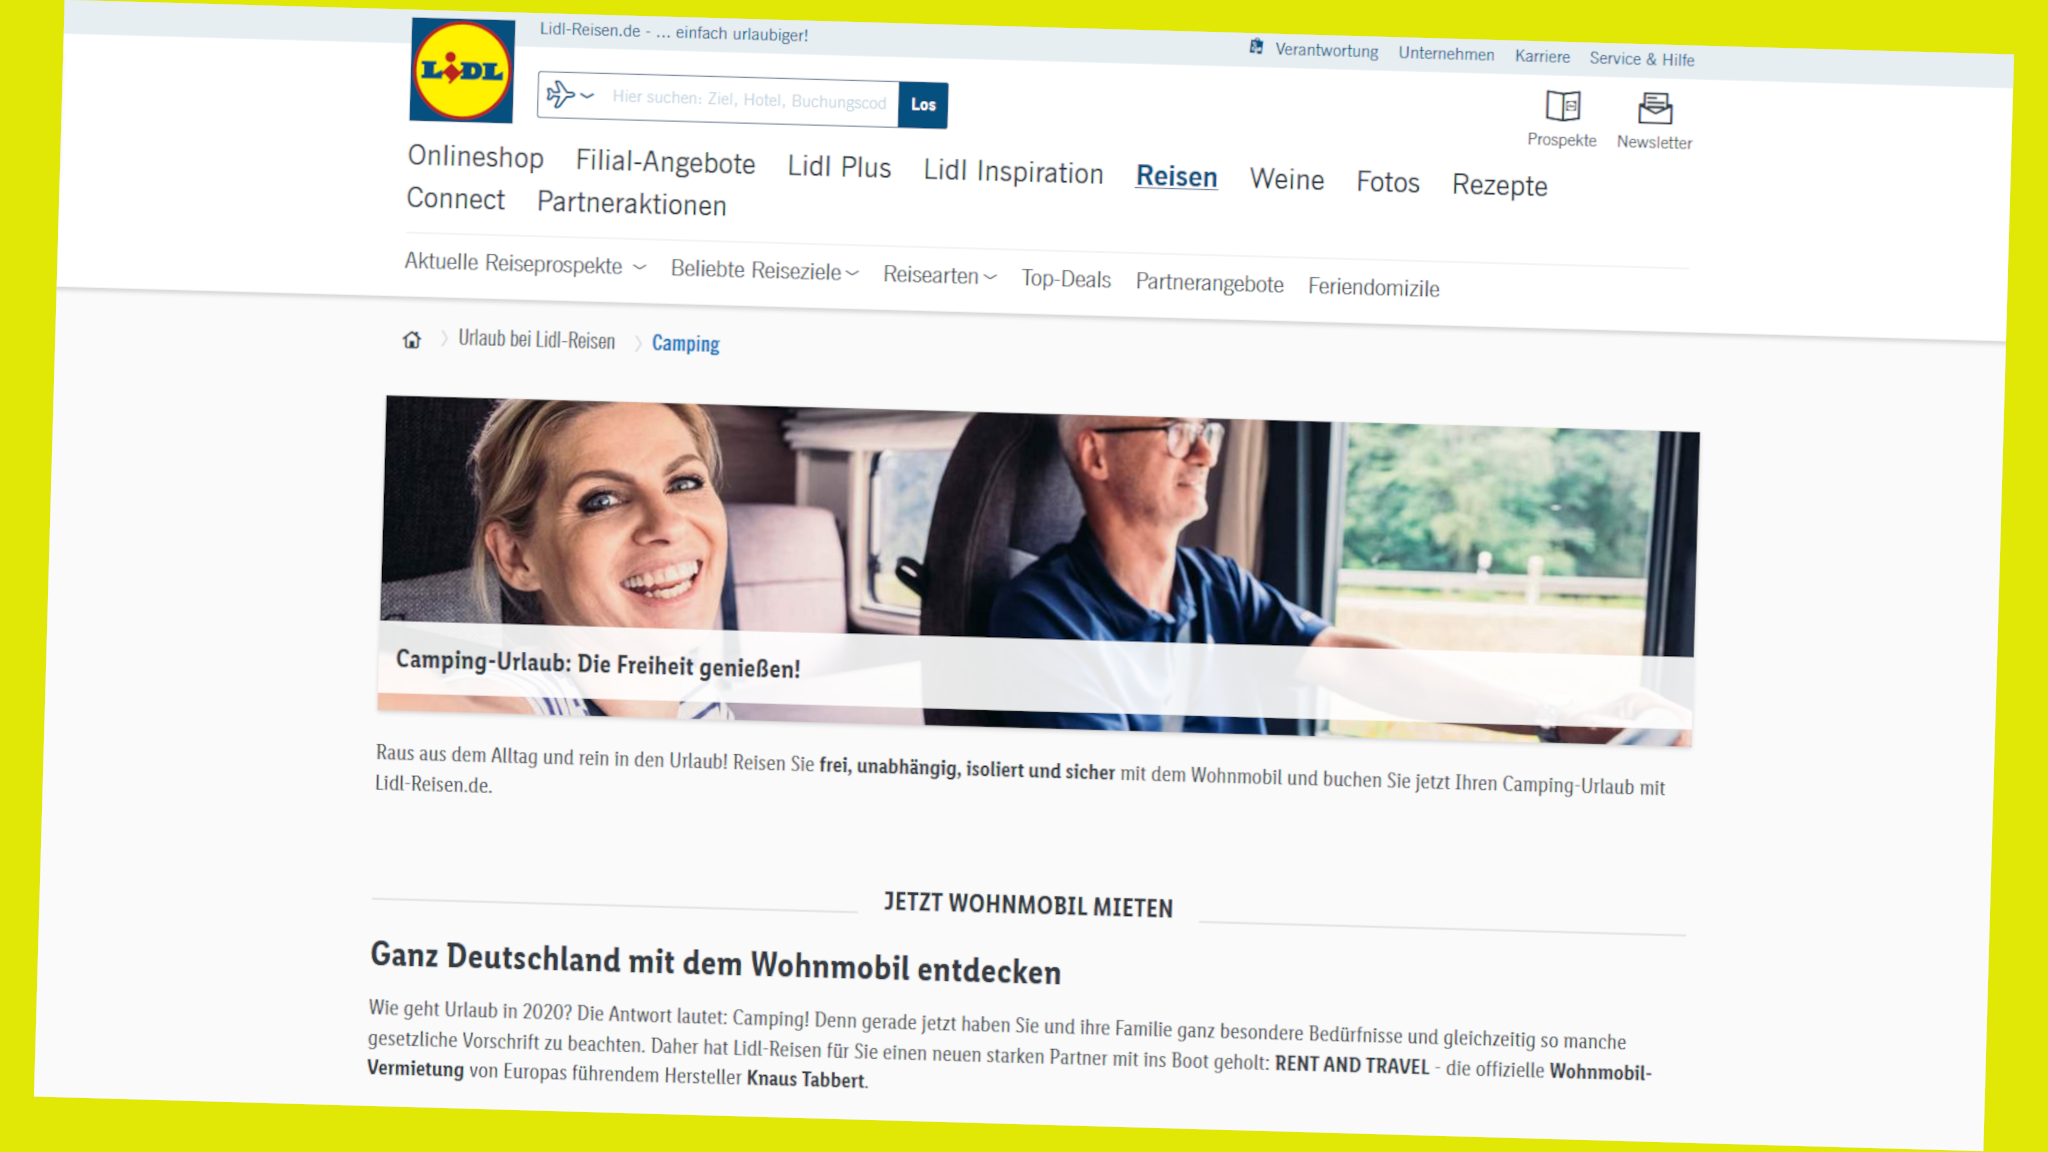 Lidl campaign: Mobile home rental insurance with fuel credit